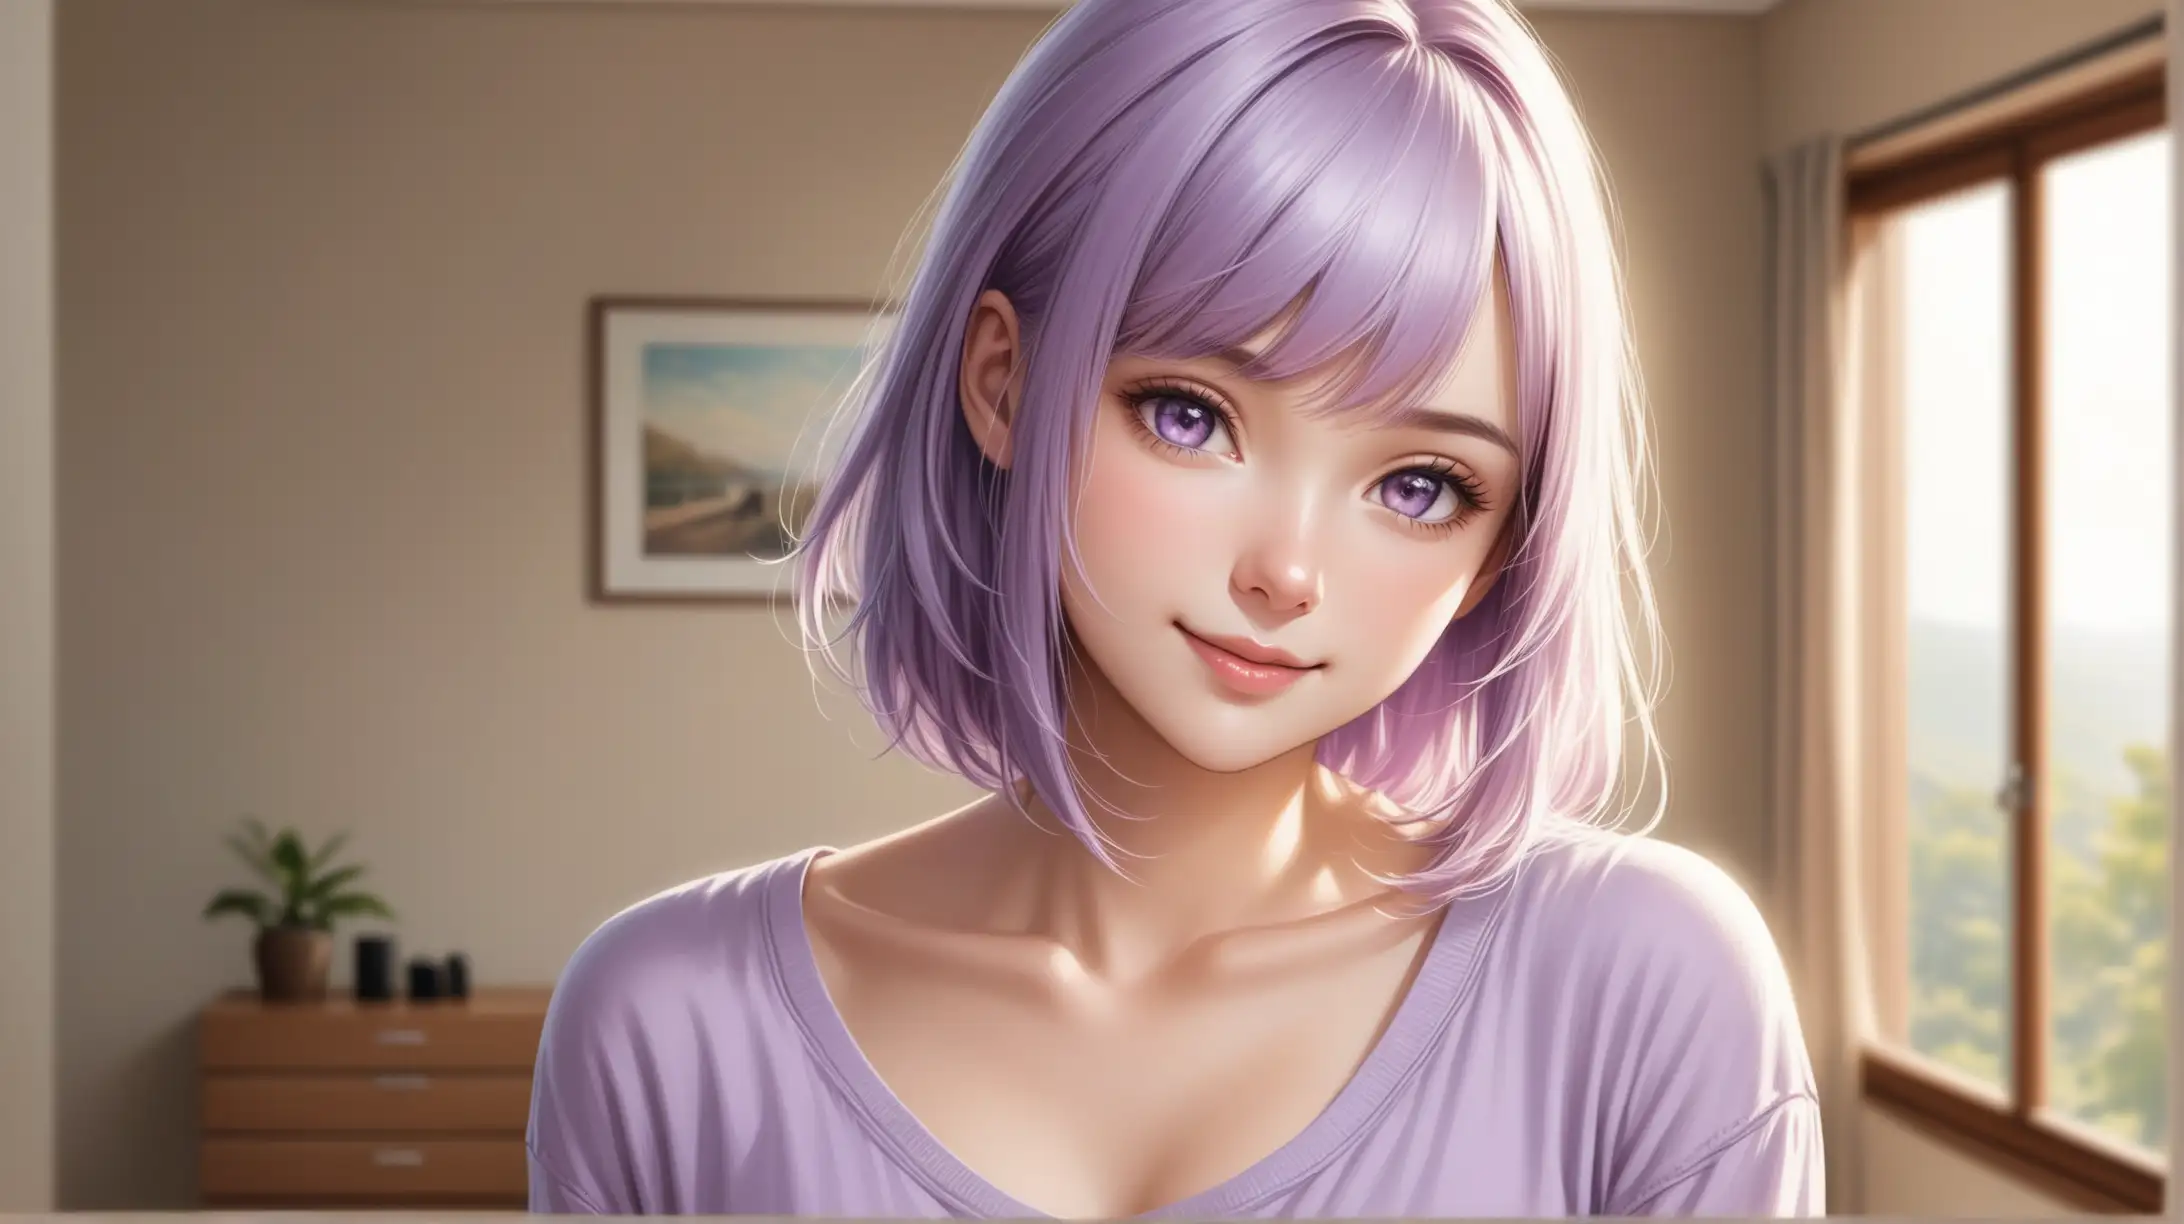 Draw a woman, shoulder length light purple hair, messy bangs framing her face, light purple eyes, petite body shape, high quality, realistic, accurate, detailed, long shot, indoors, natural lighting, seductive pose, casual outfit, smiling at the viewer